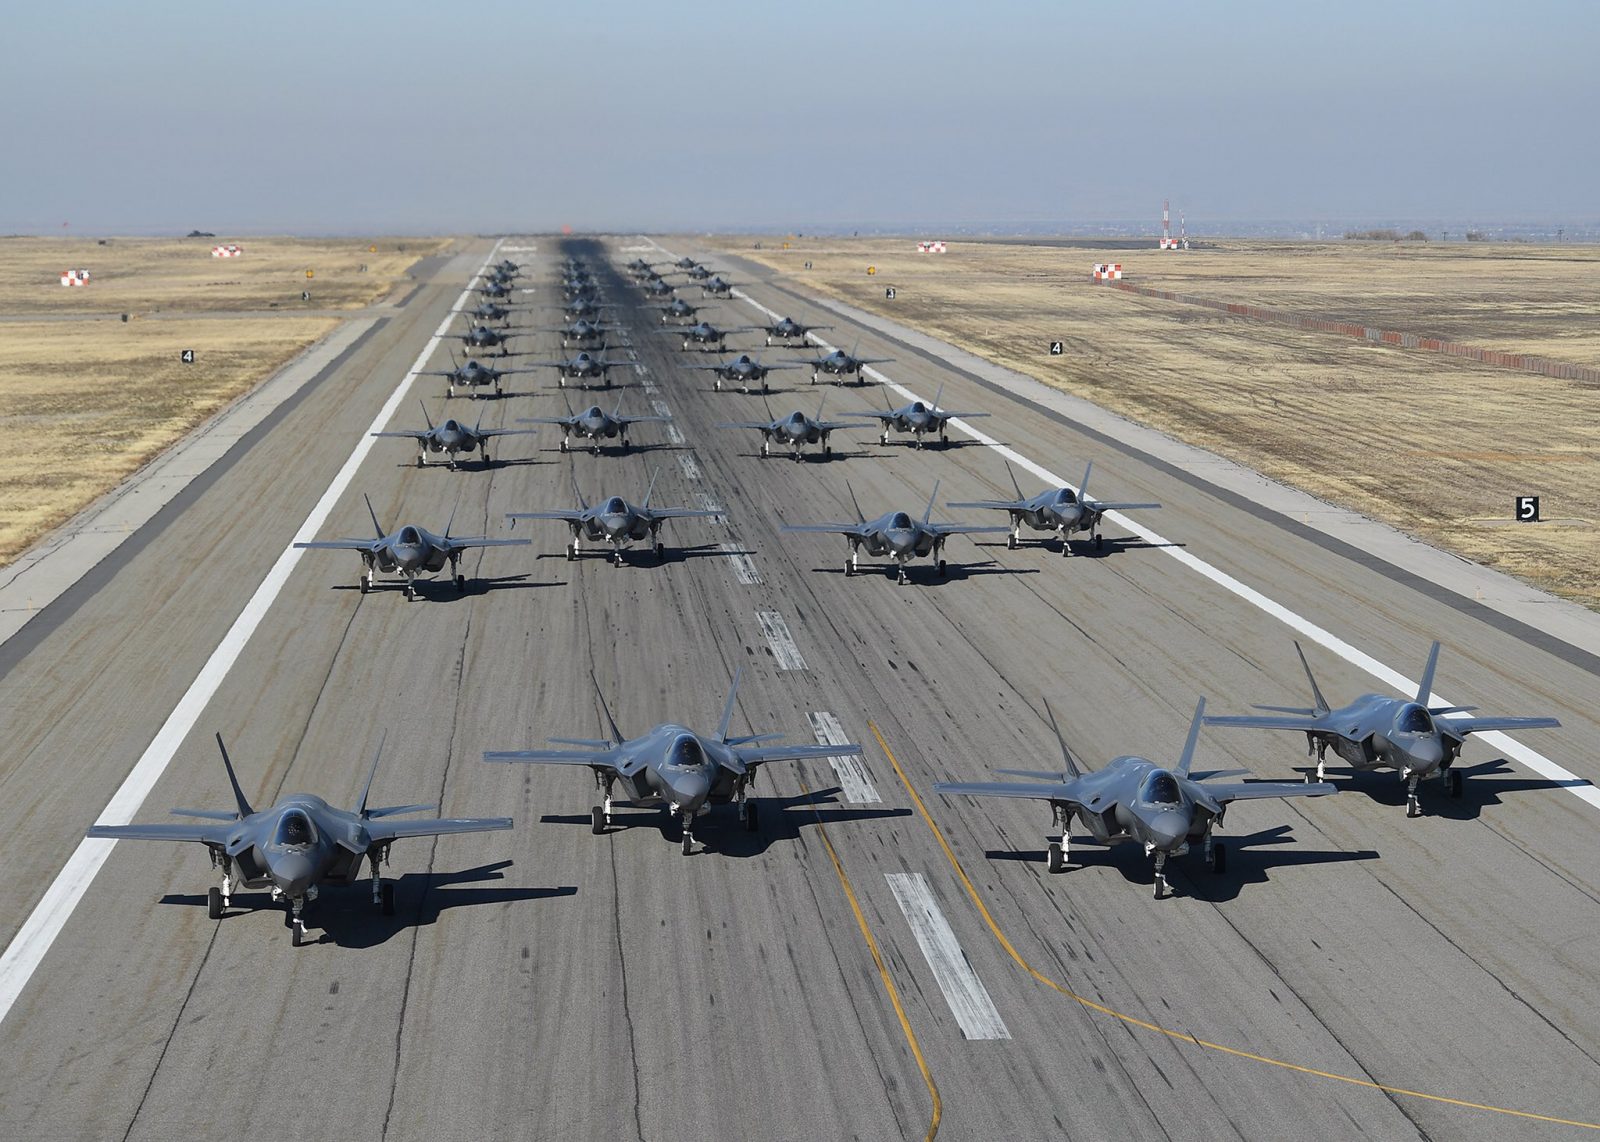 Largest F-35 Formation Ever; this what happened after the “Elephant Walk” of 35 F-35s that made the news a couple of days ago